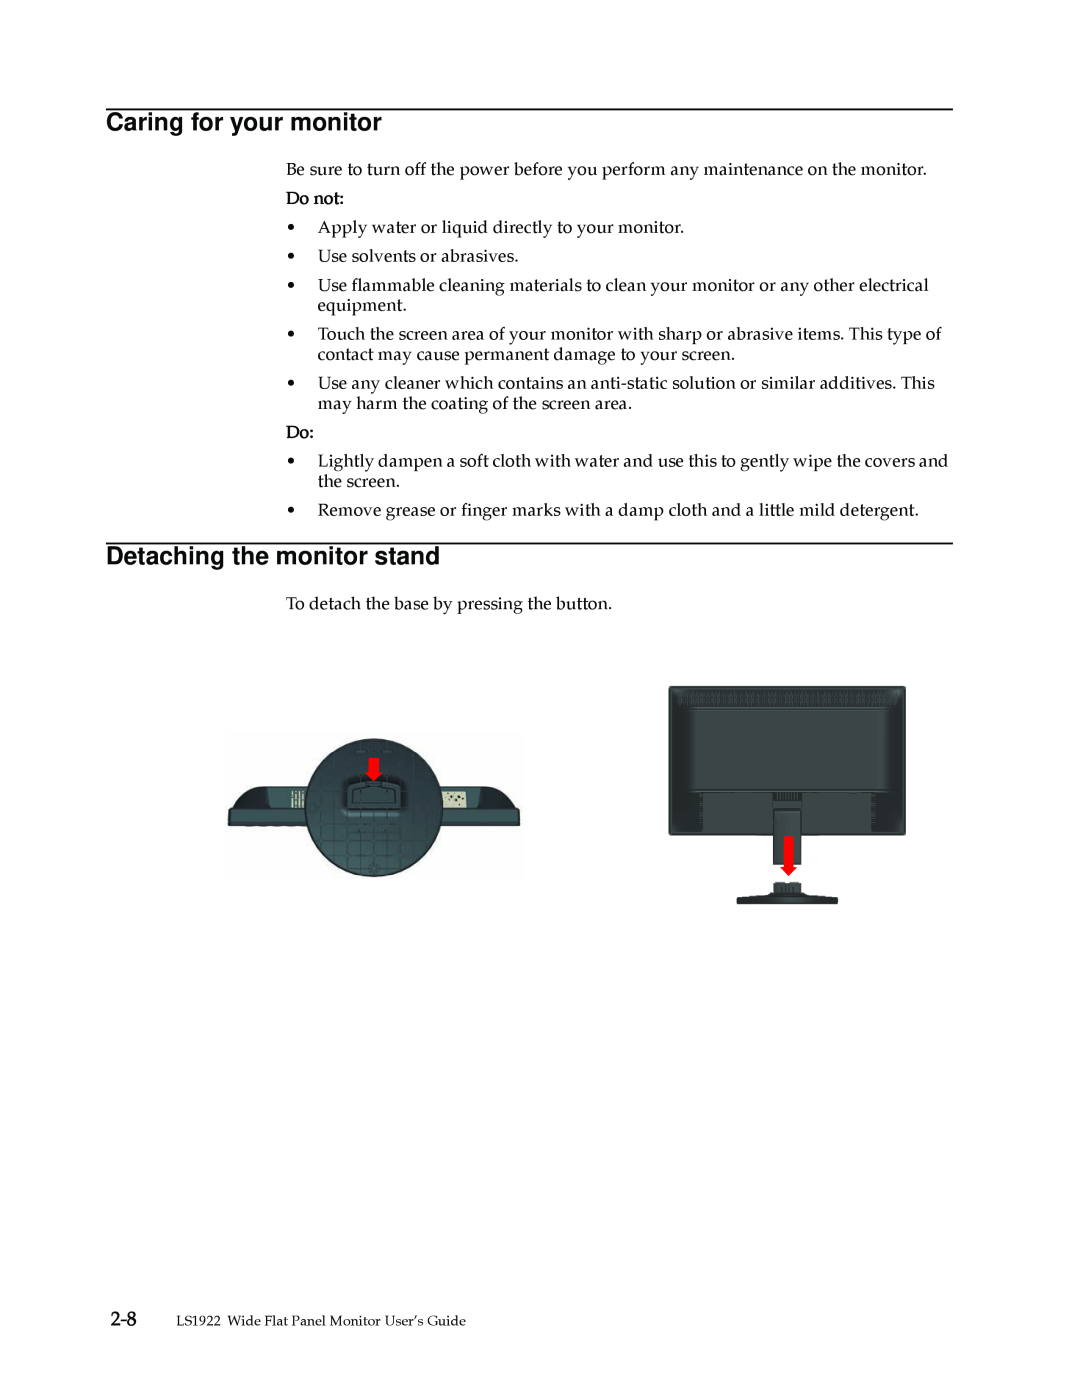 Lenovo 2580AF1 manual Caring for your monitor, Detaching the monitor stand, Do not 